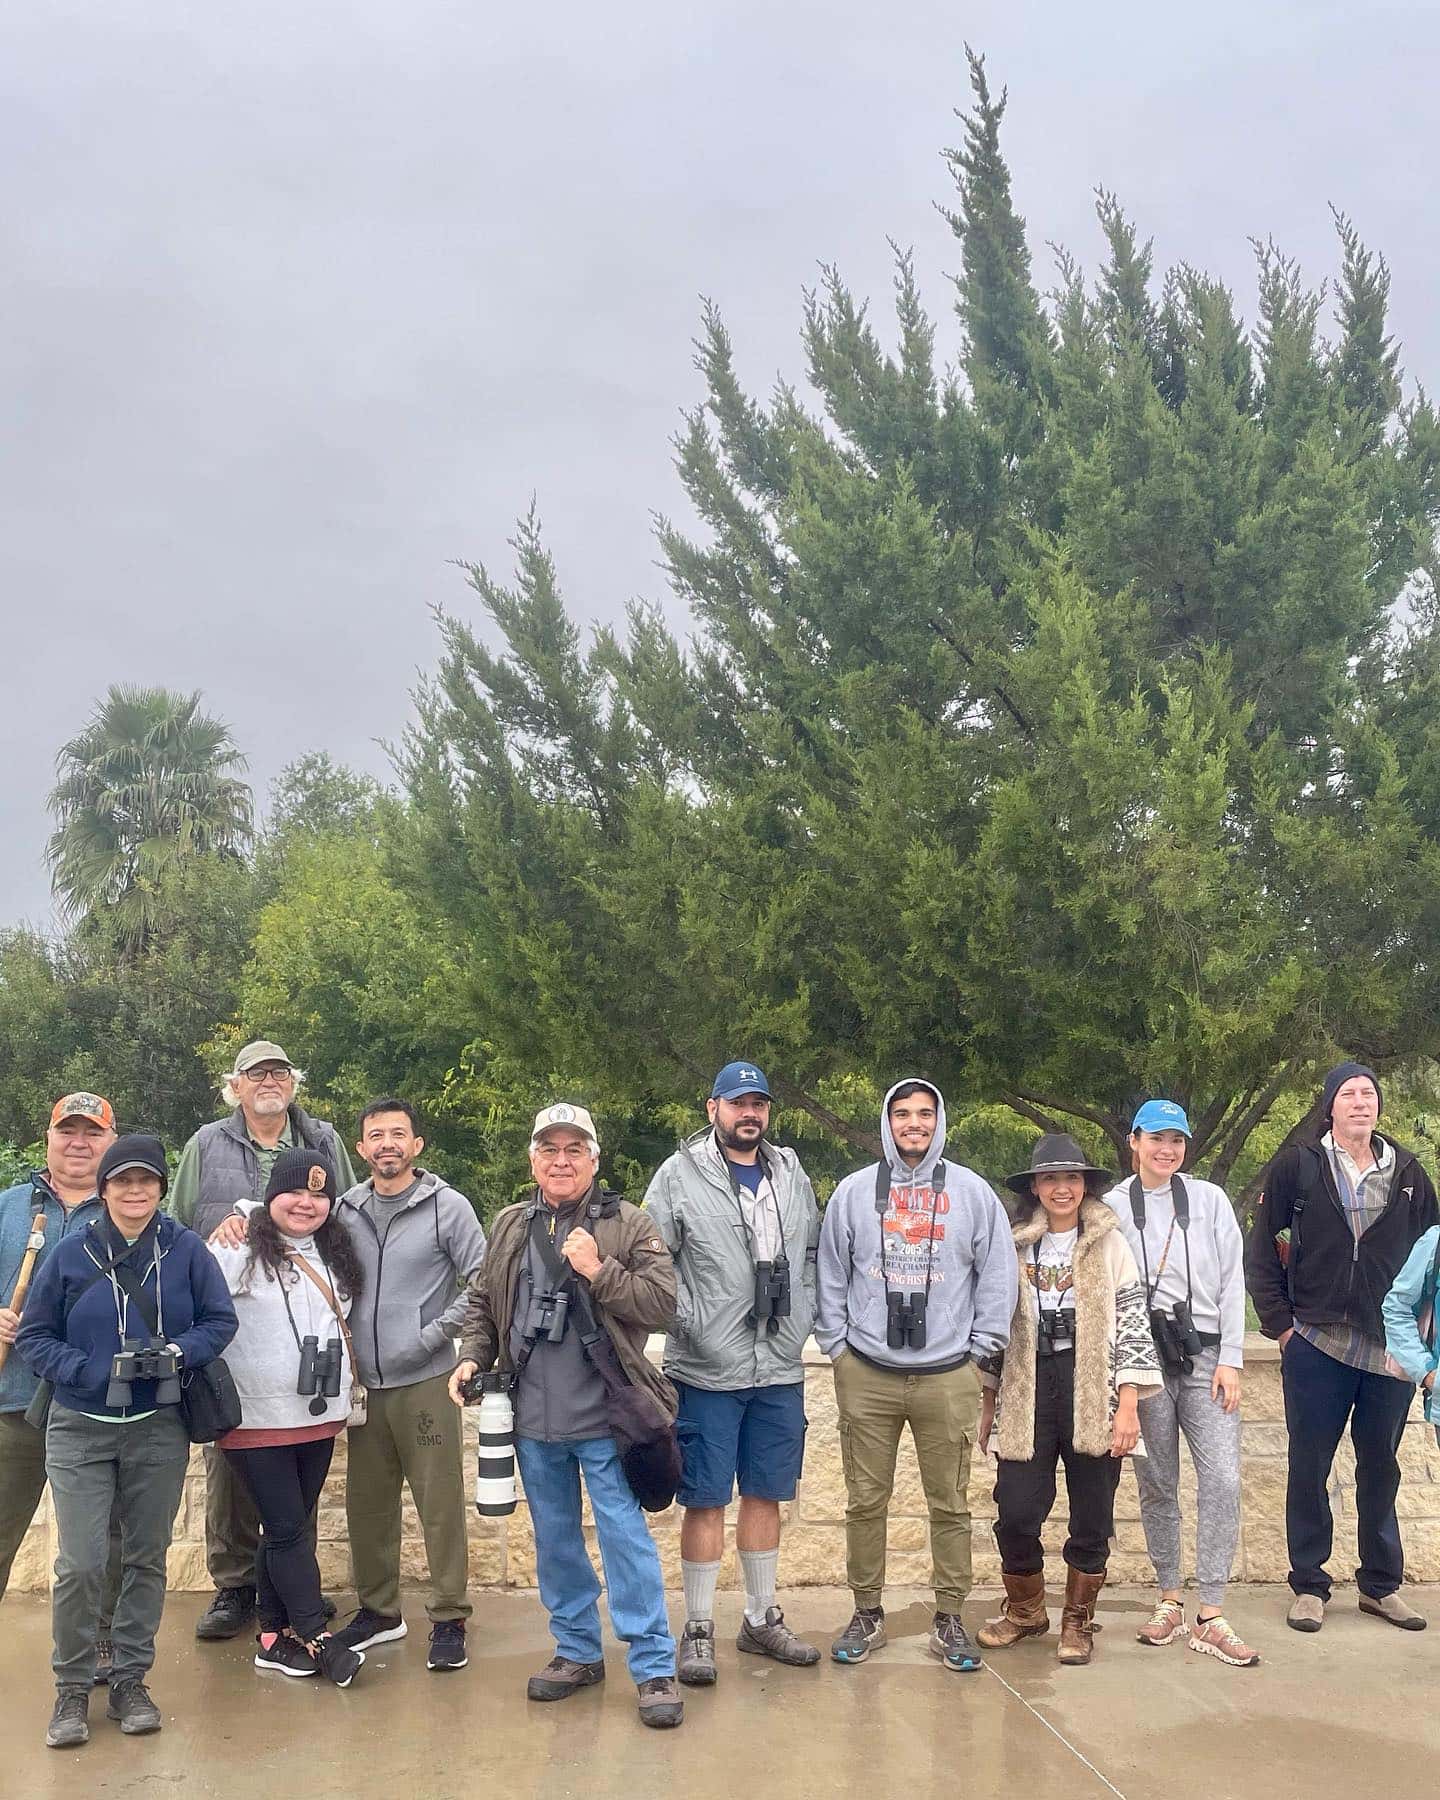 A group of people in hiking clothes stand in a rainy outdoor environment